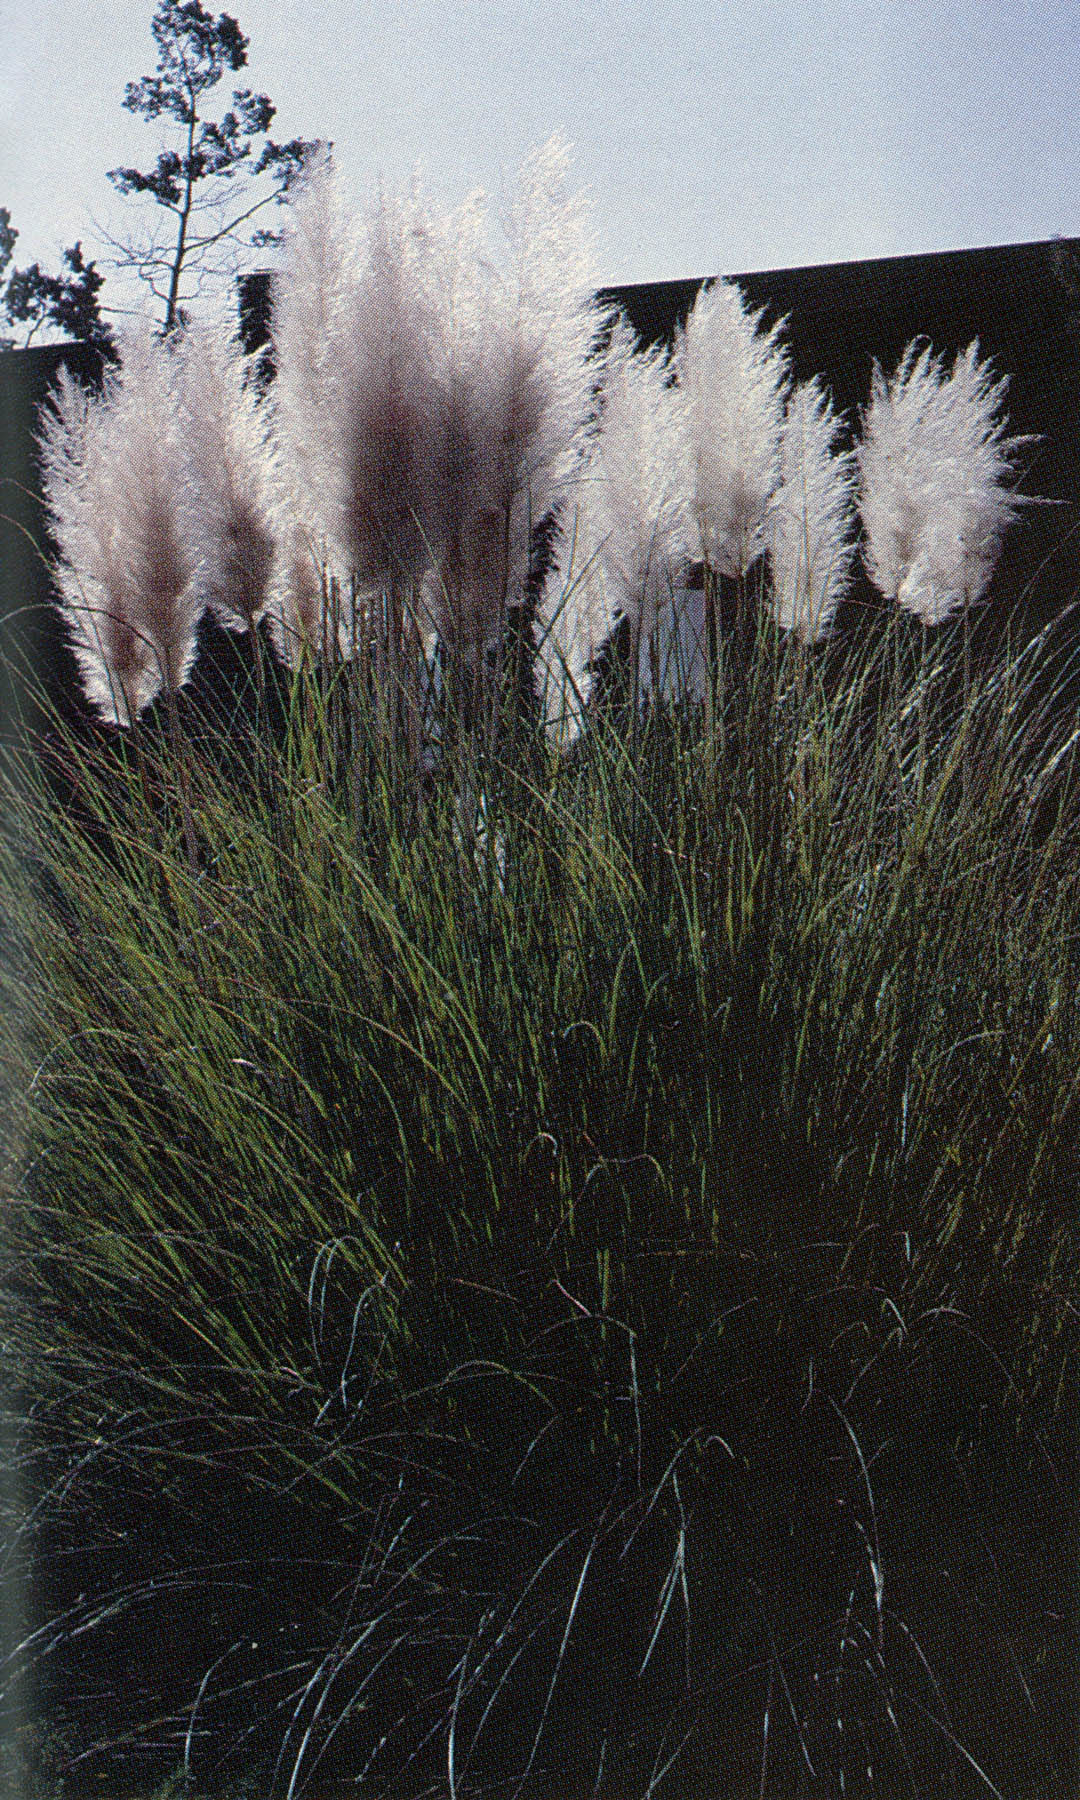 Pacific Horticulture Society | Pampas Grasses: One a Weed and One a ...